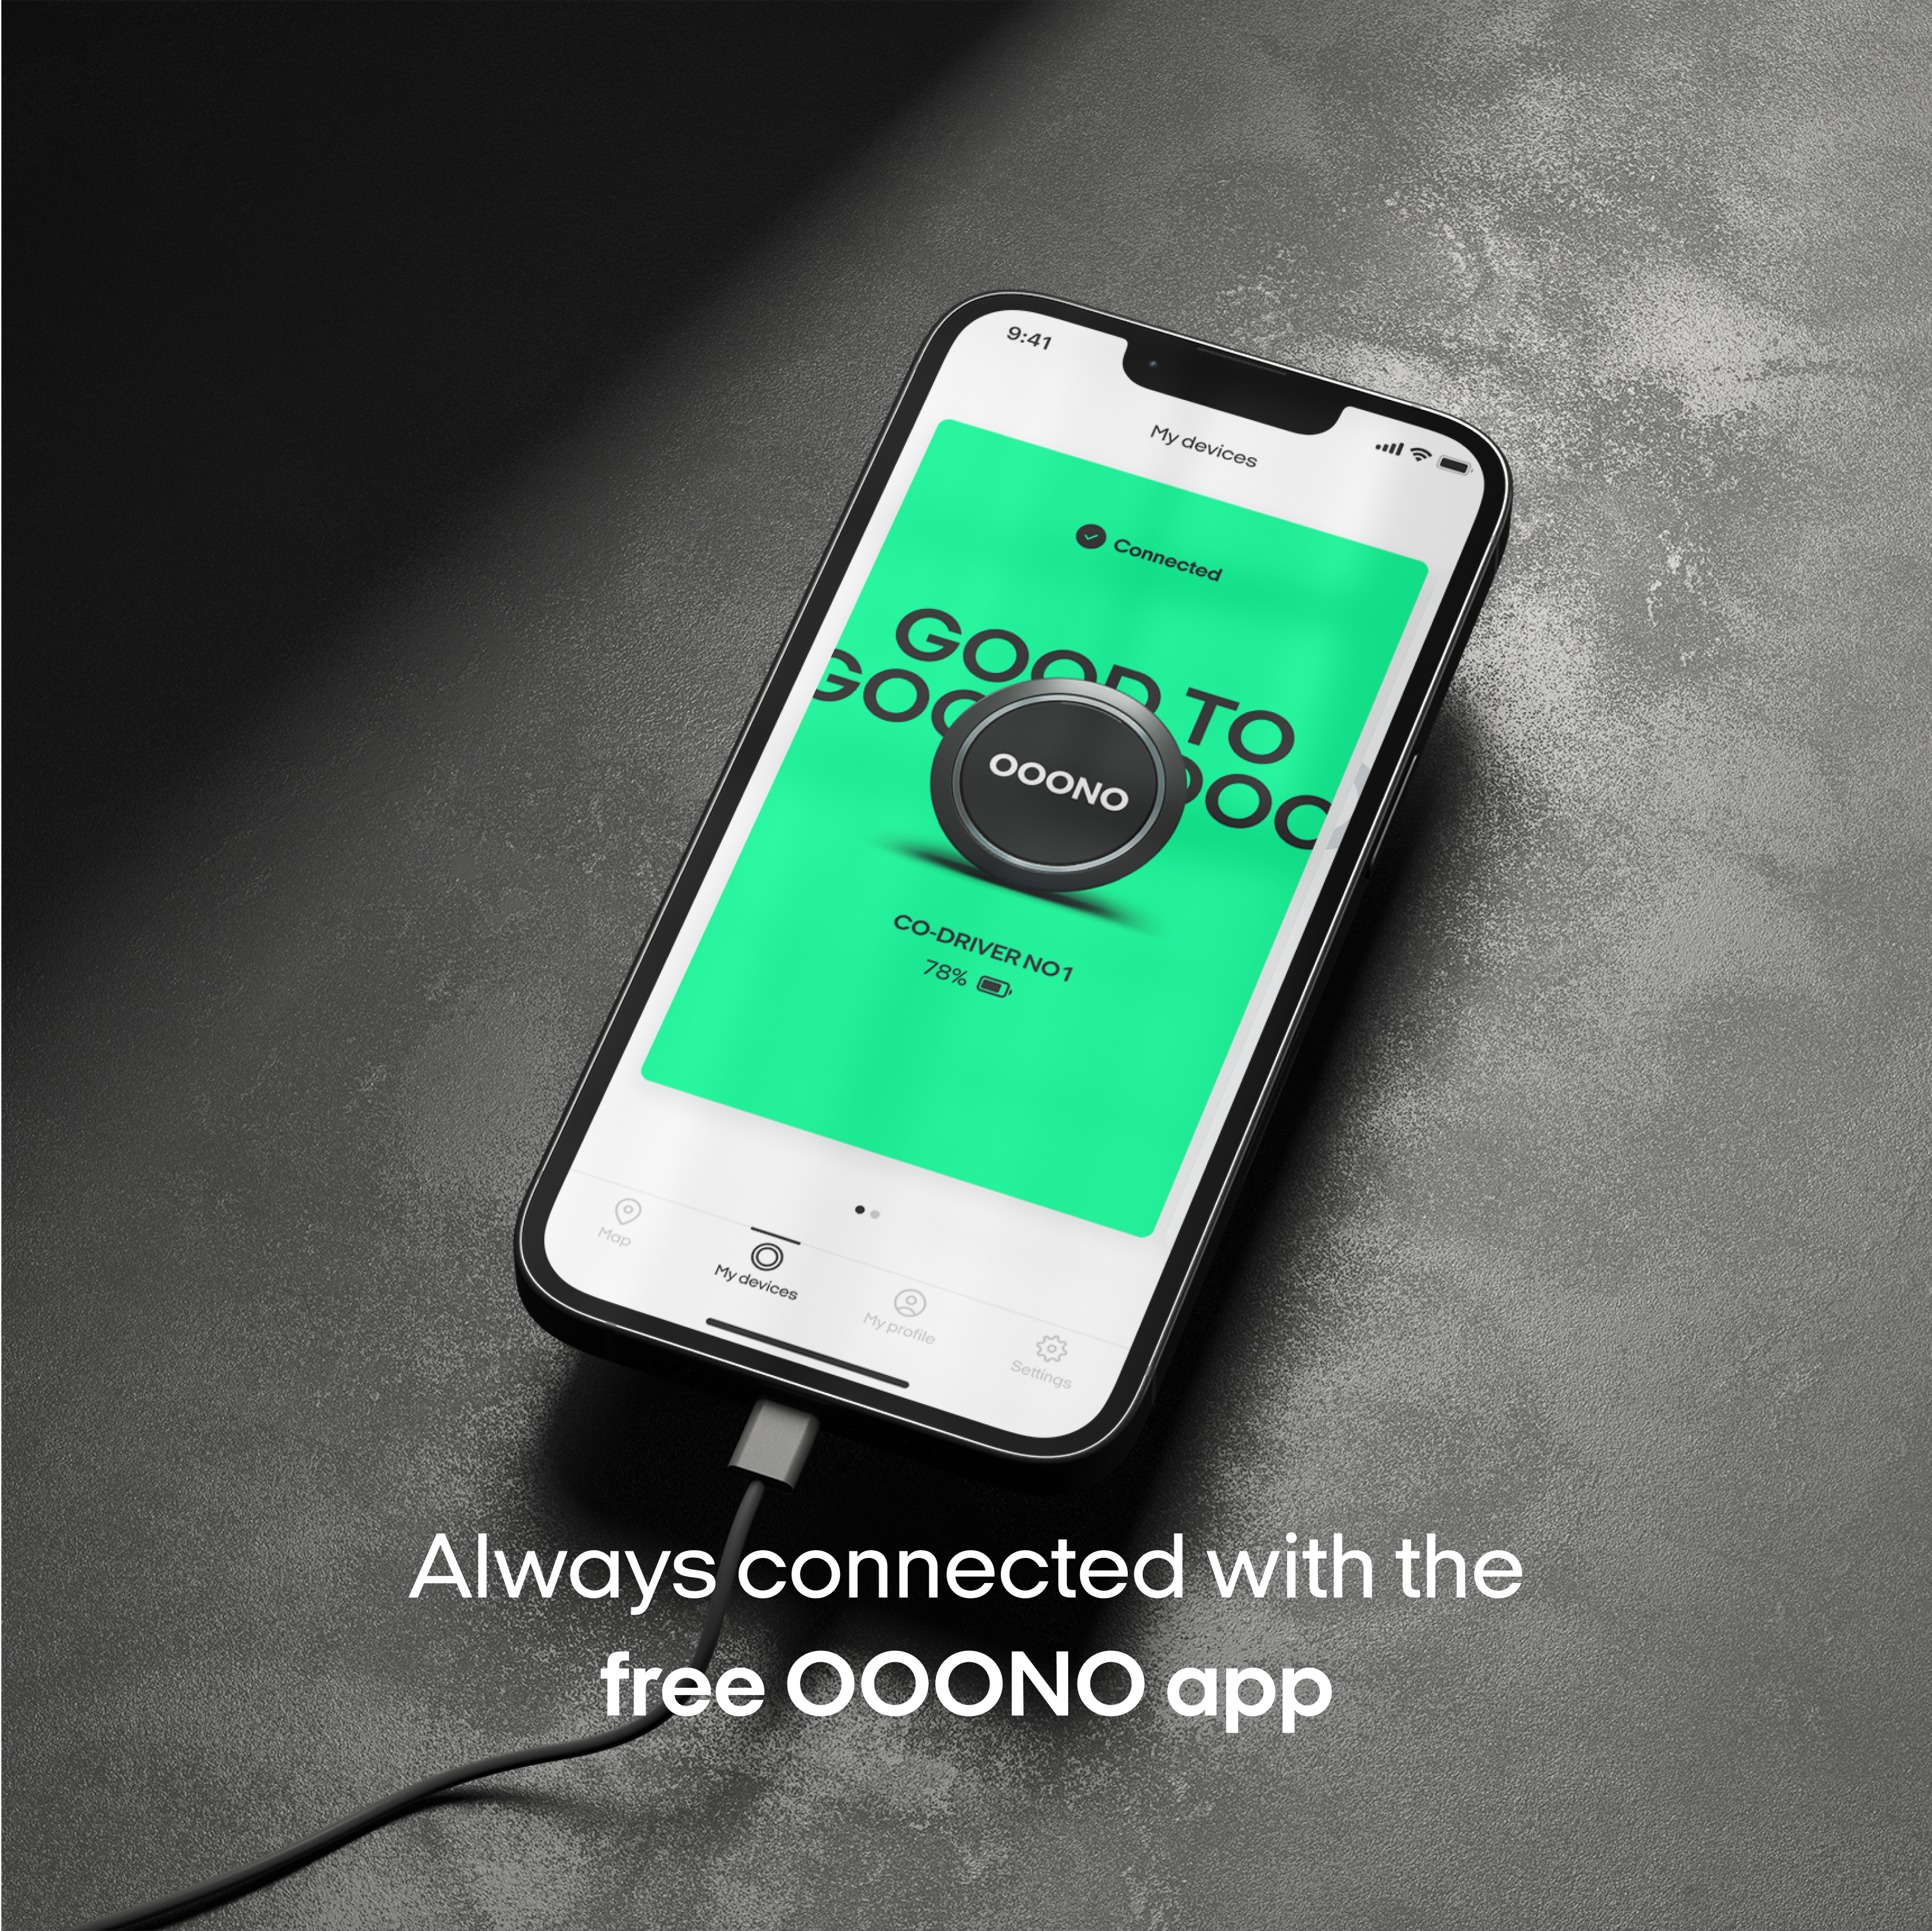 OOONO CO-Driver NO1: Warns of speed cameras and road hazards in real time